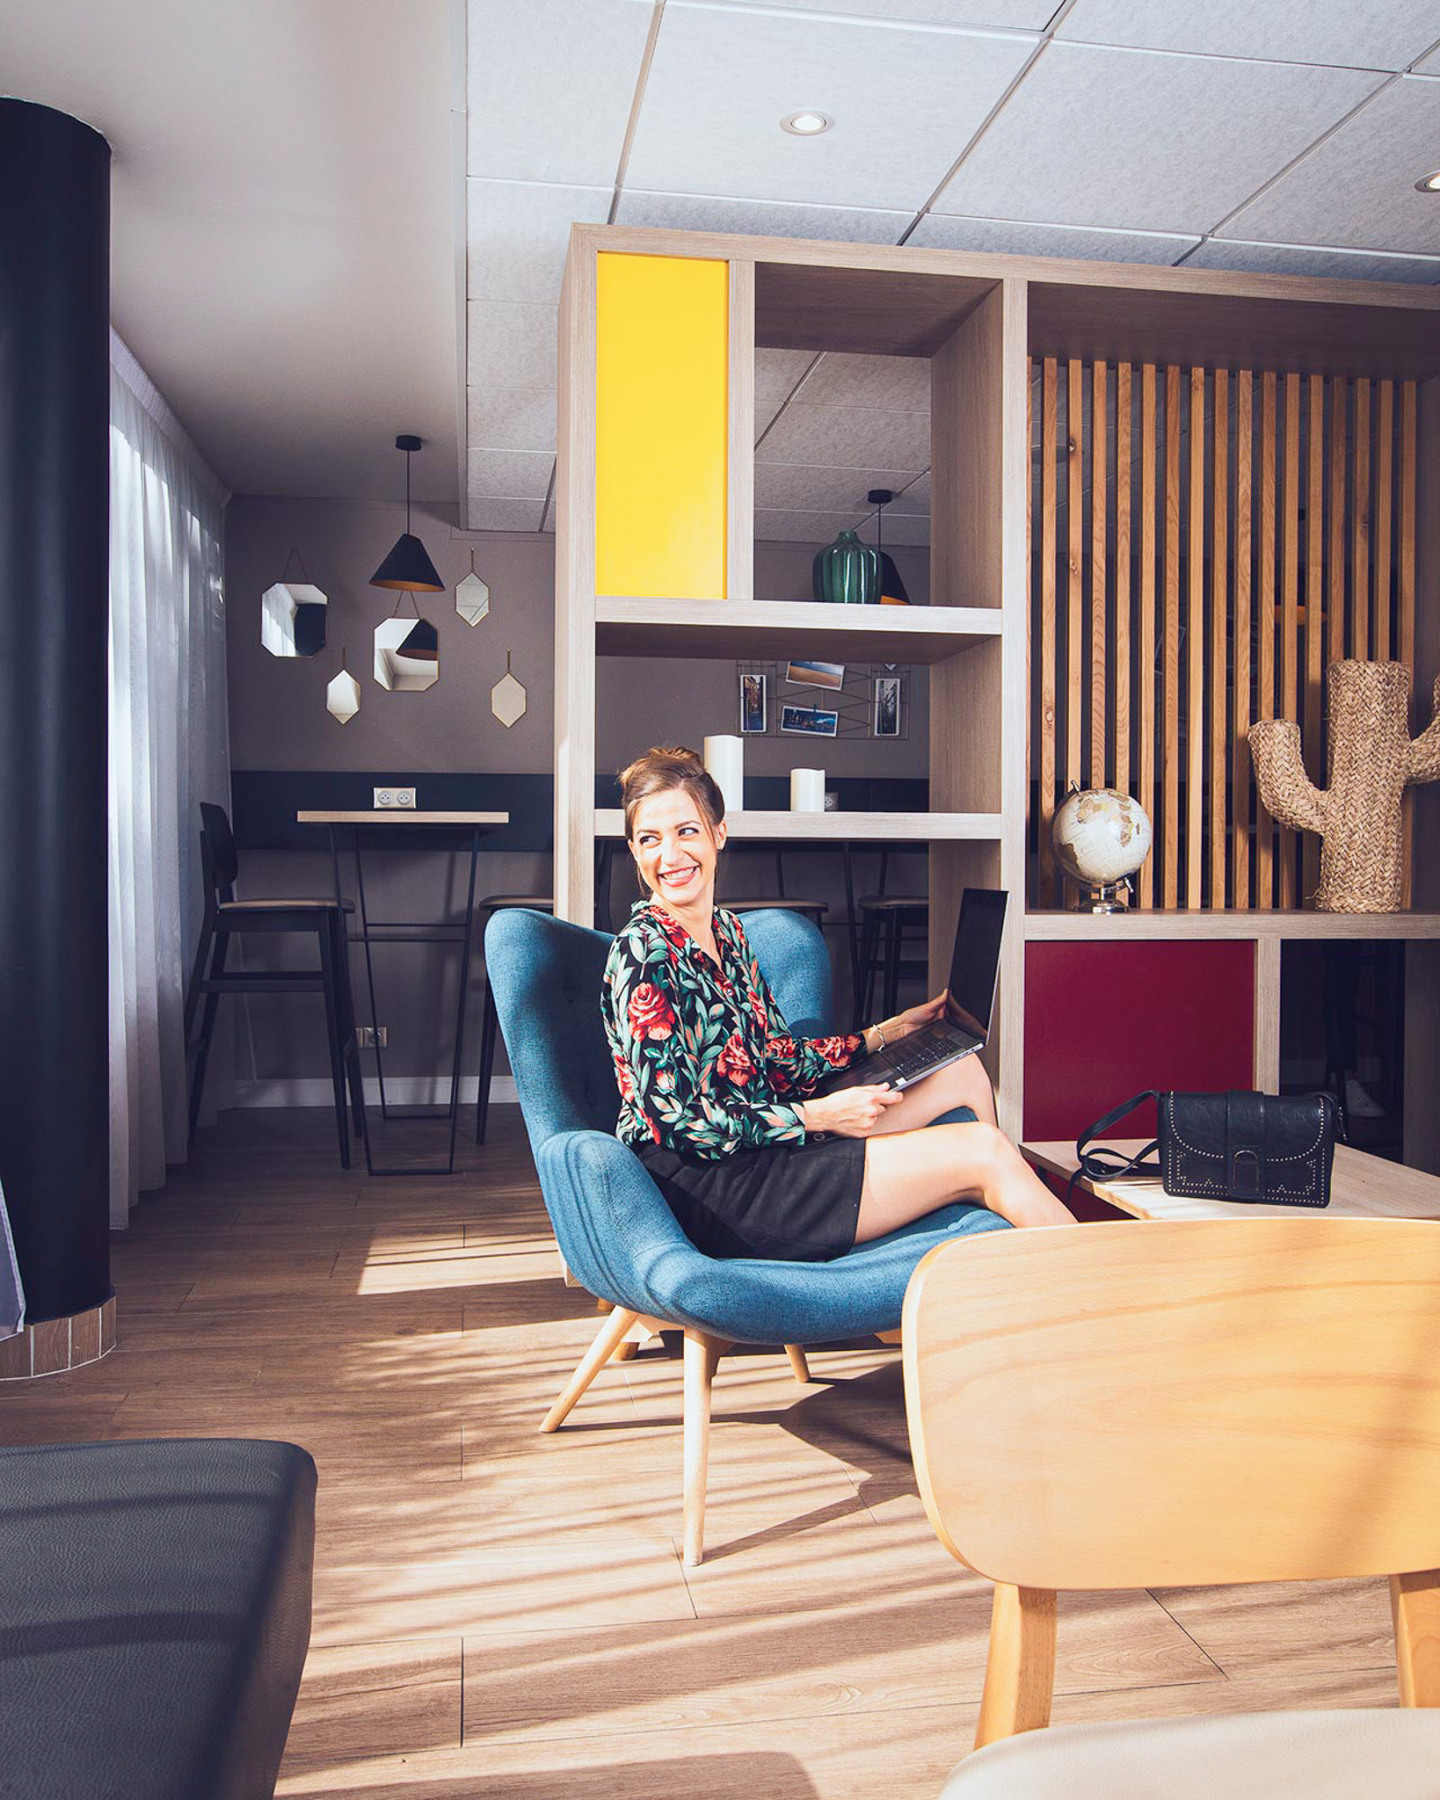 Smiling woman working on a laptop while sitting comfortably in a blue fabric armchair in an Appart'City apartment, with a modern interior that includes wooden shelving, a workspace desk, and stylish home decor.